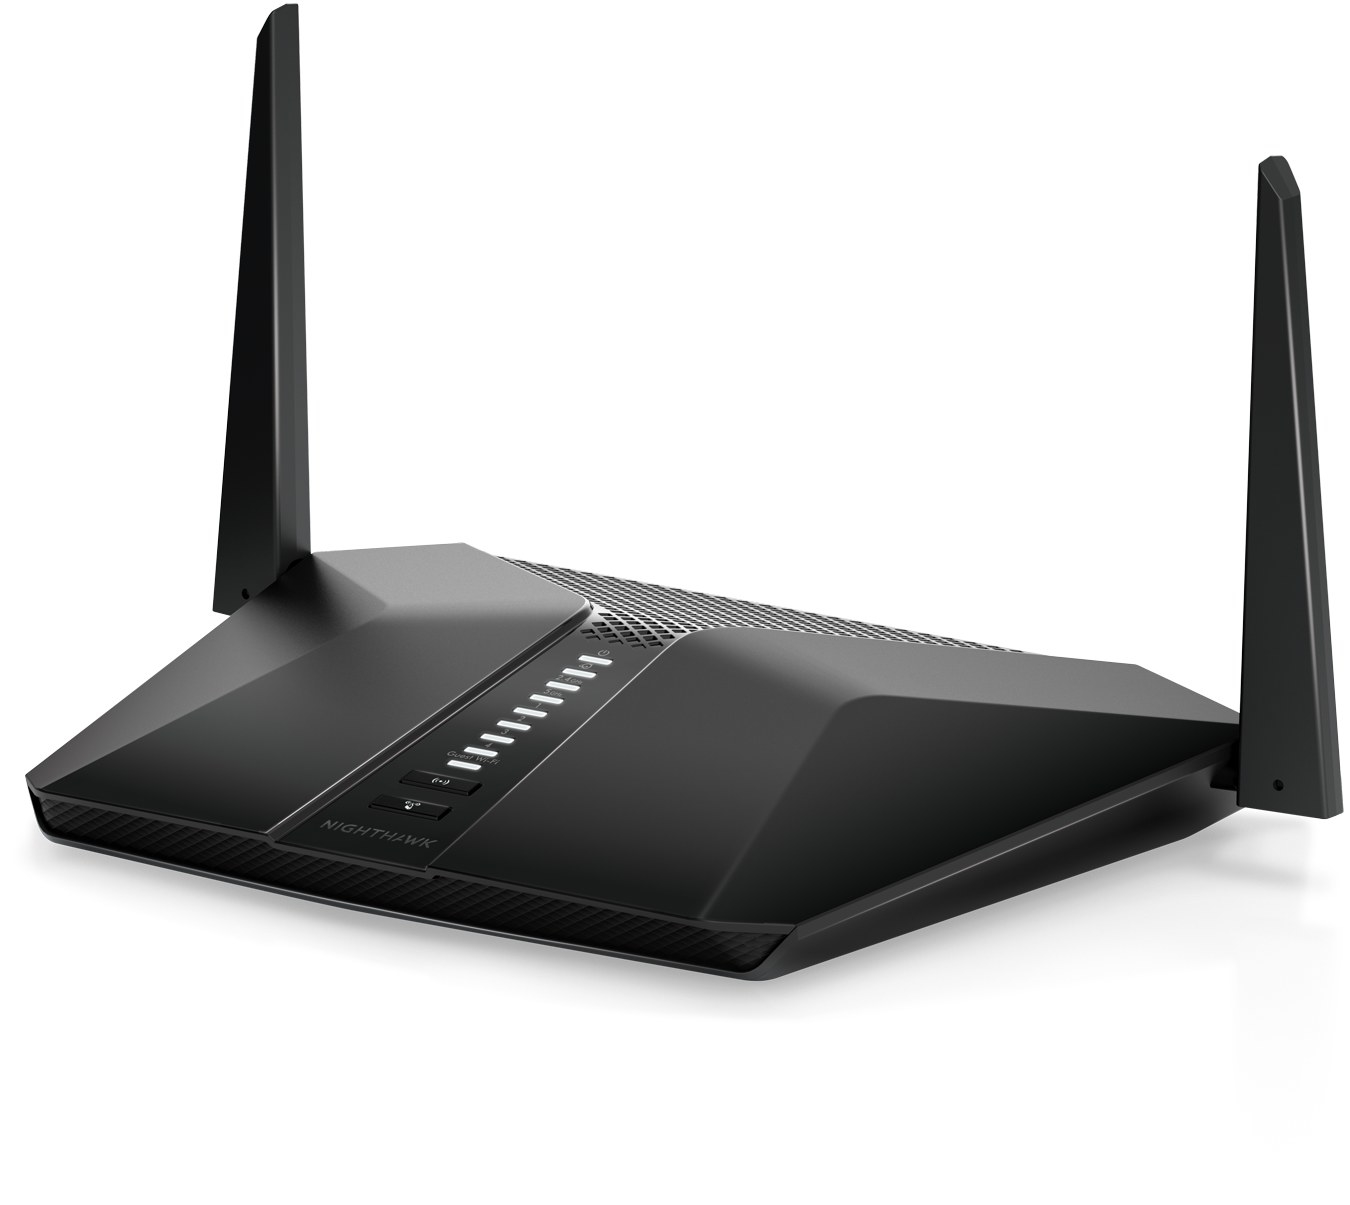 The black router